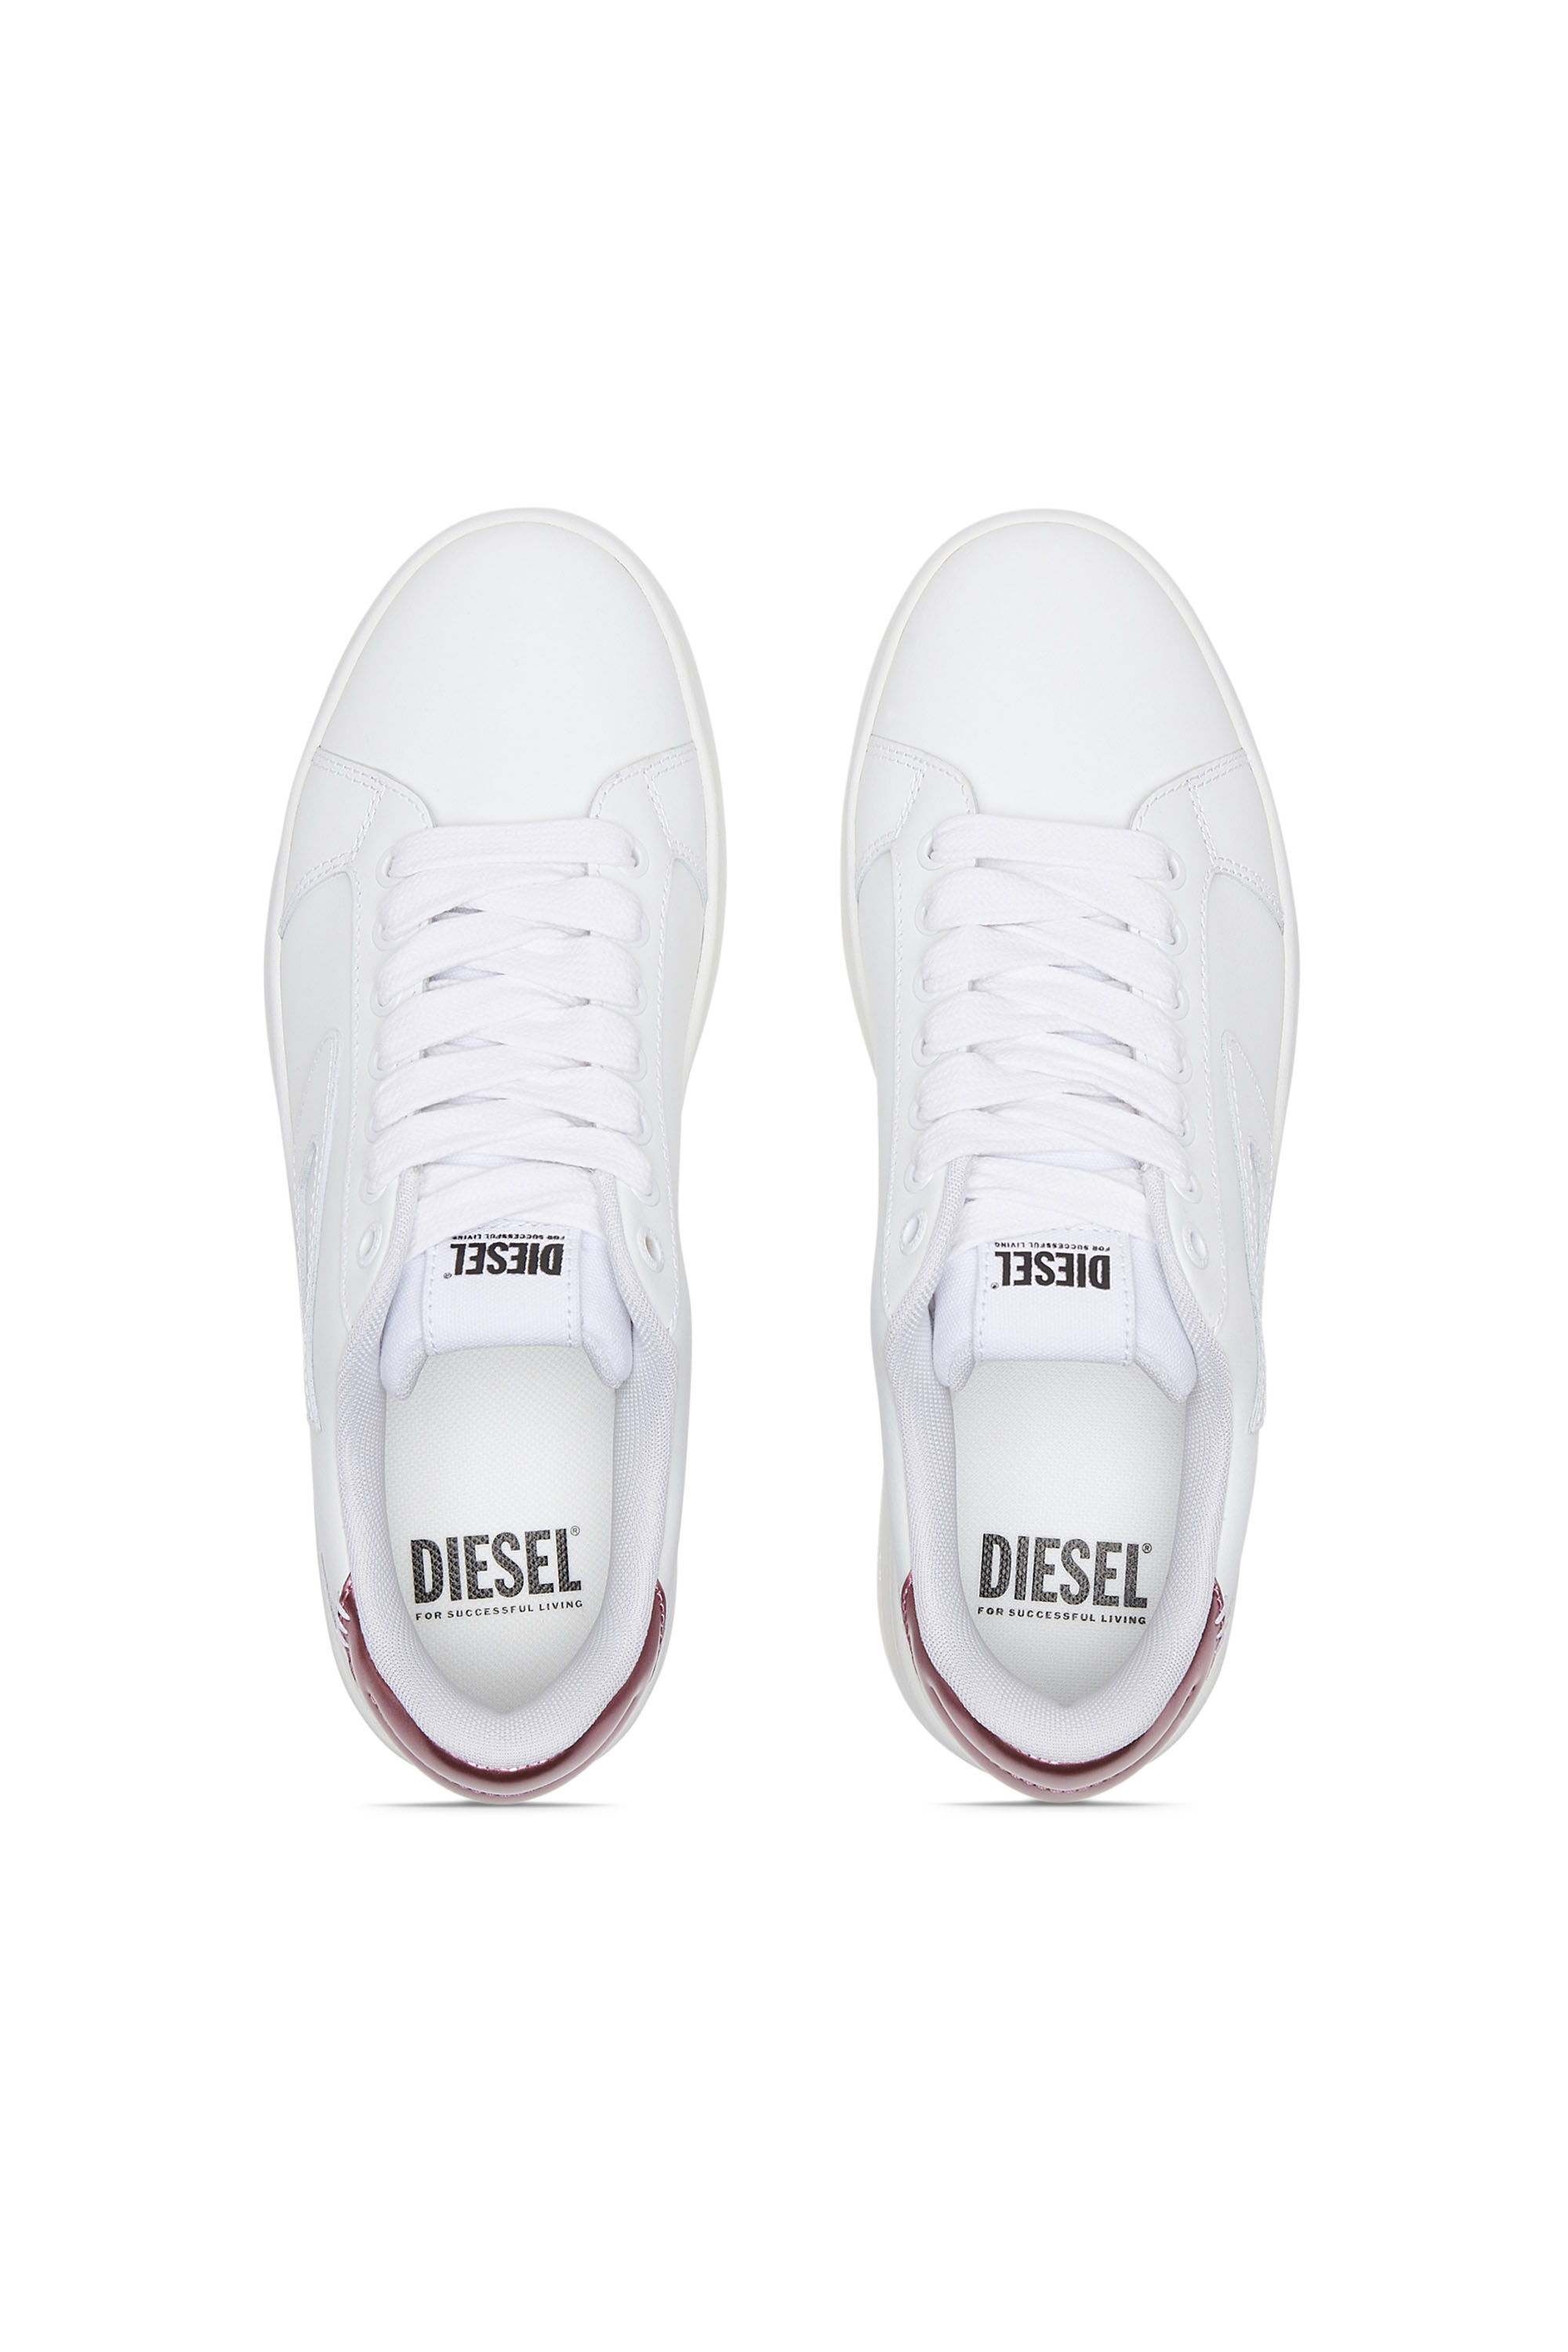 Diesel - S-ATHENE BOLD W, Weiss/Rosa - Image 4